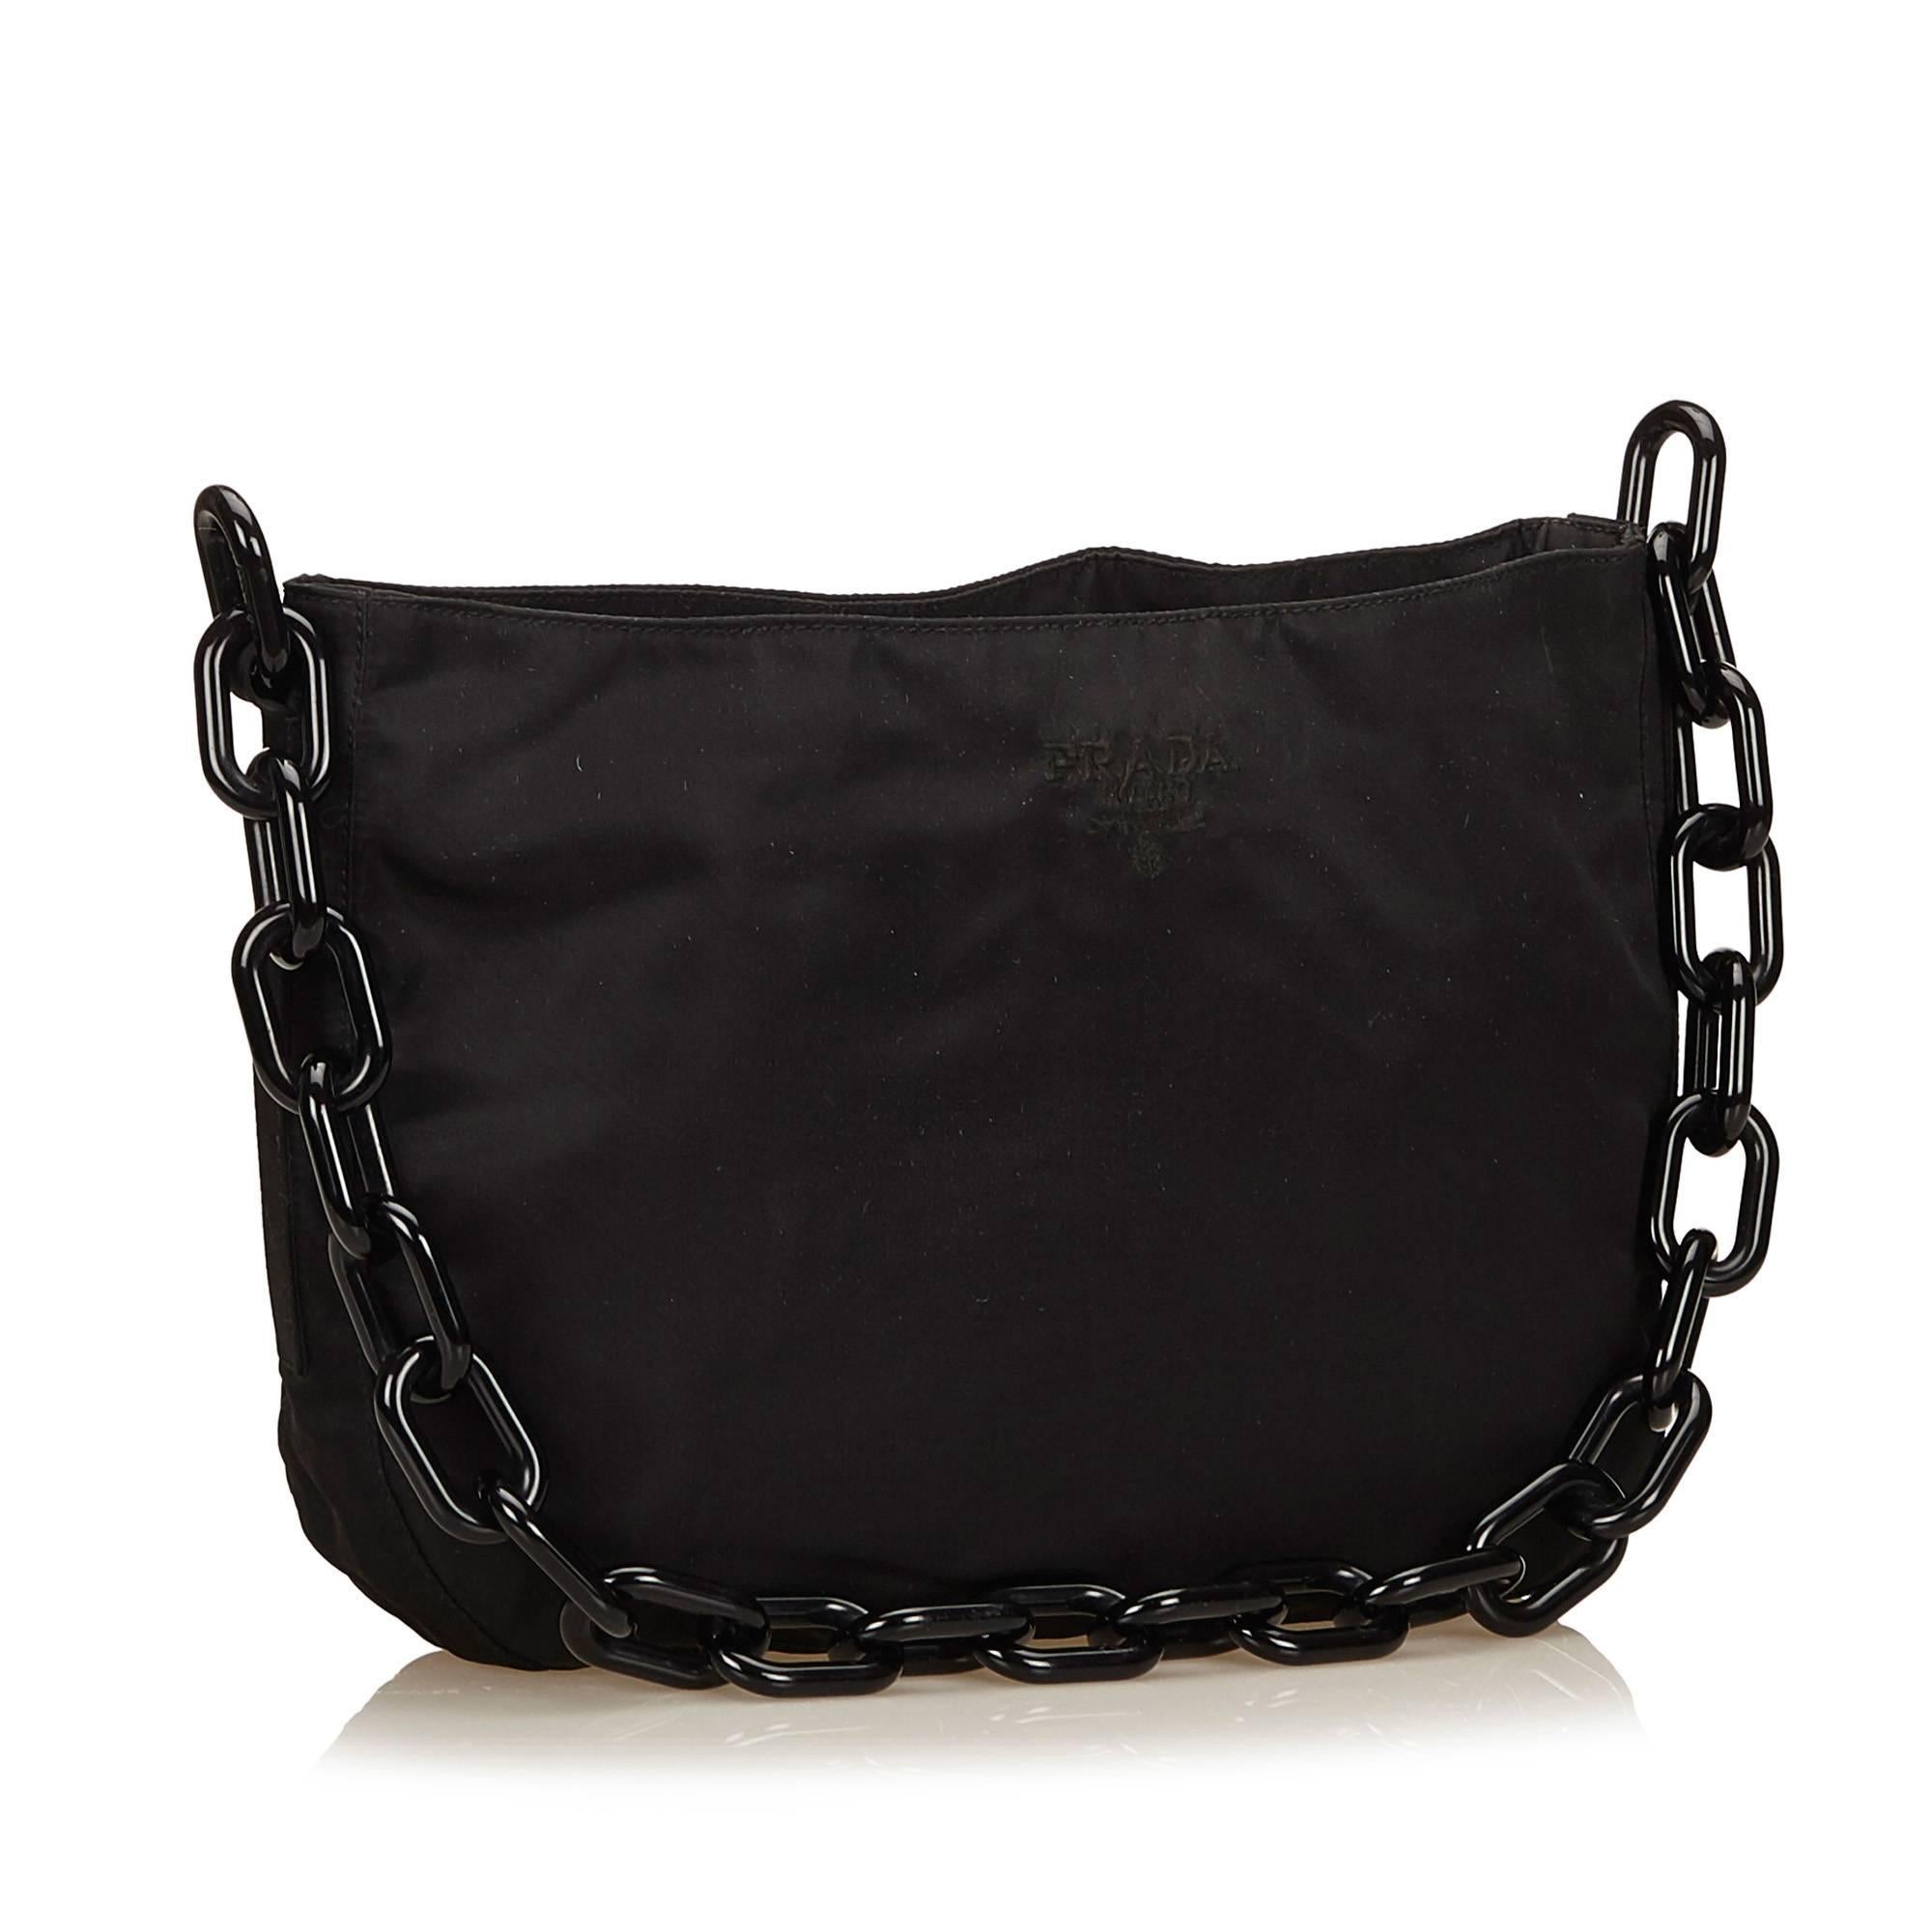 This shoulder bag features a nylon body, resin shoulder chain, open top, and interior zip pocket. It carries a B condition rating.

Inclusions: 
Dust Bag